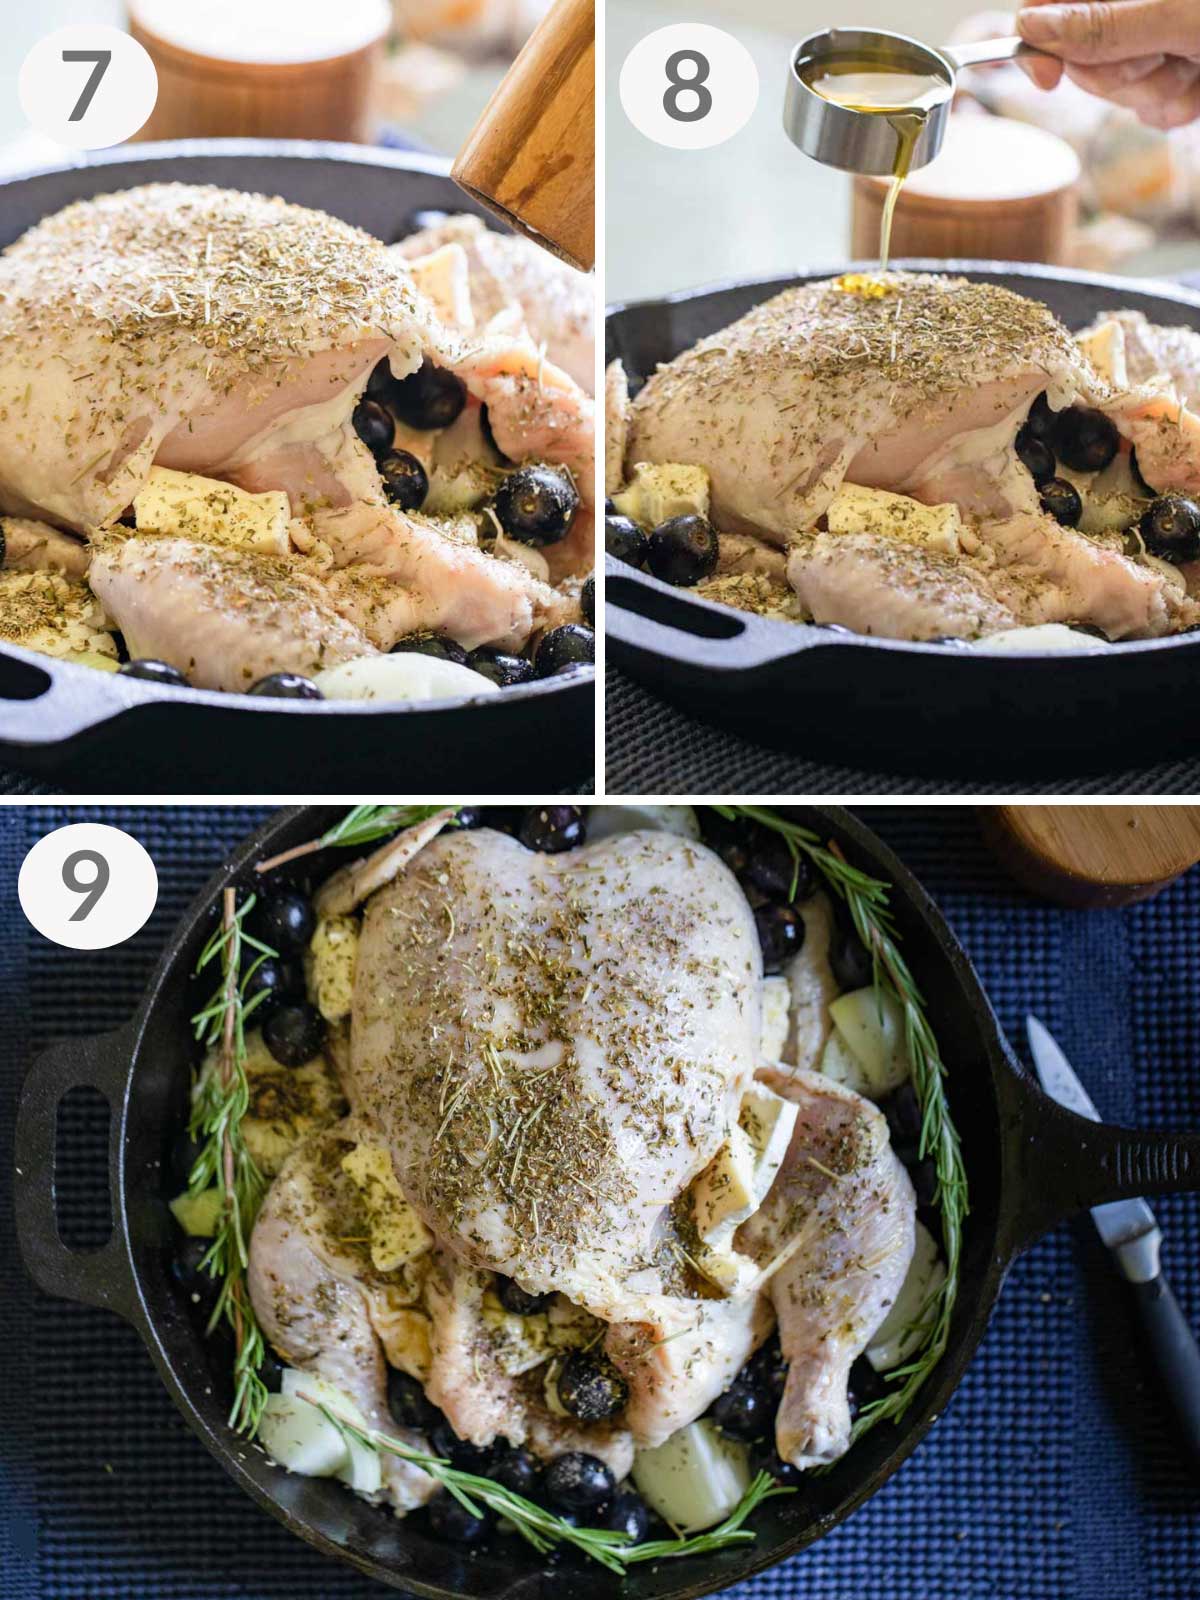 A series od steps to season a whole chicken with Italian seasoning, Rosemary, and olive oil.